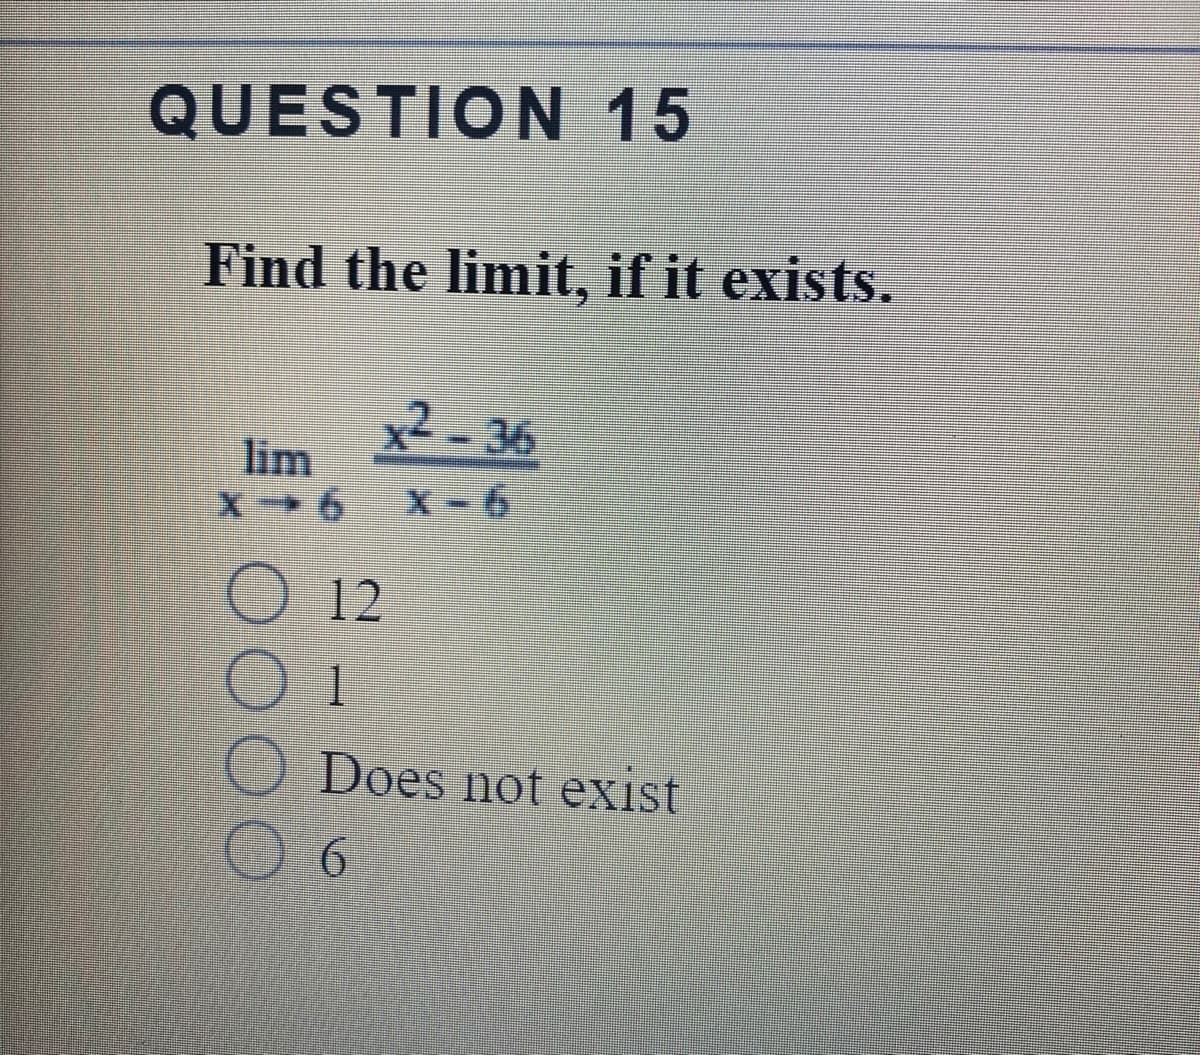 QUESTION 15
Find the limit, if it exists.
2-36
lim
X-6
O 12
1
Does not exist
6.
